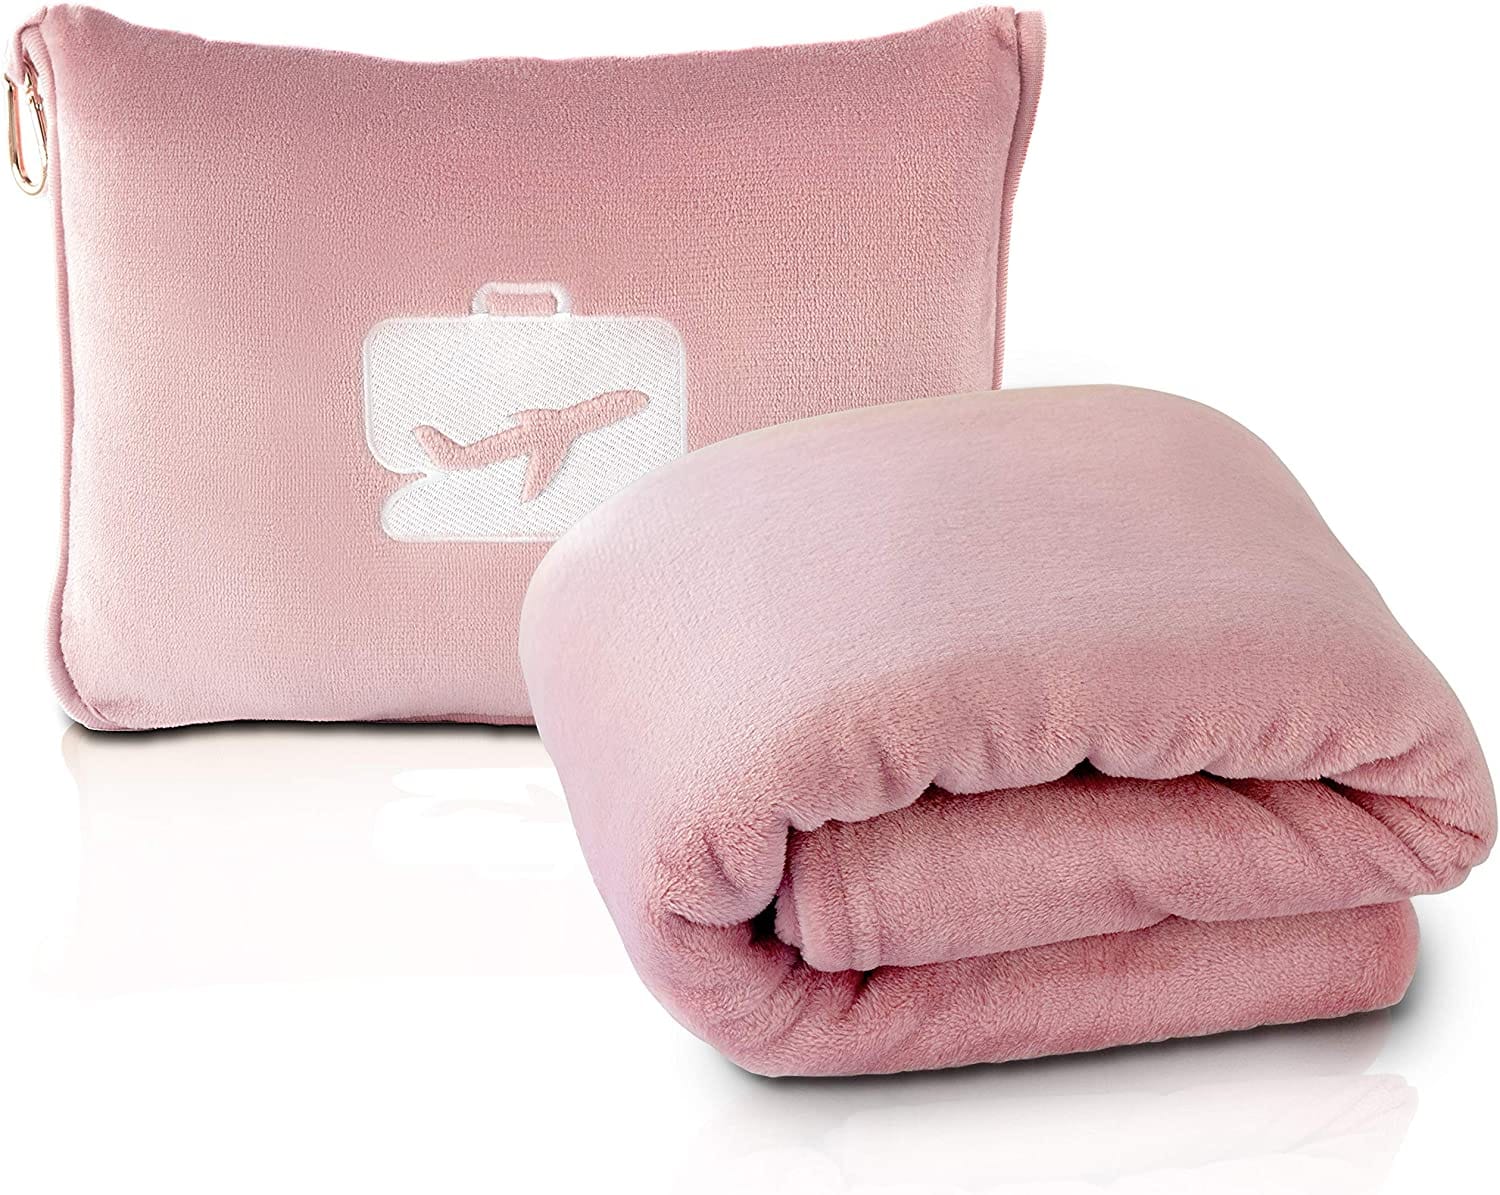 A picture of a small travel pillow. This travel pillow converts from a pillow to a blanket.